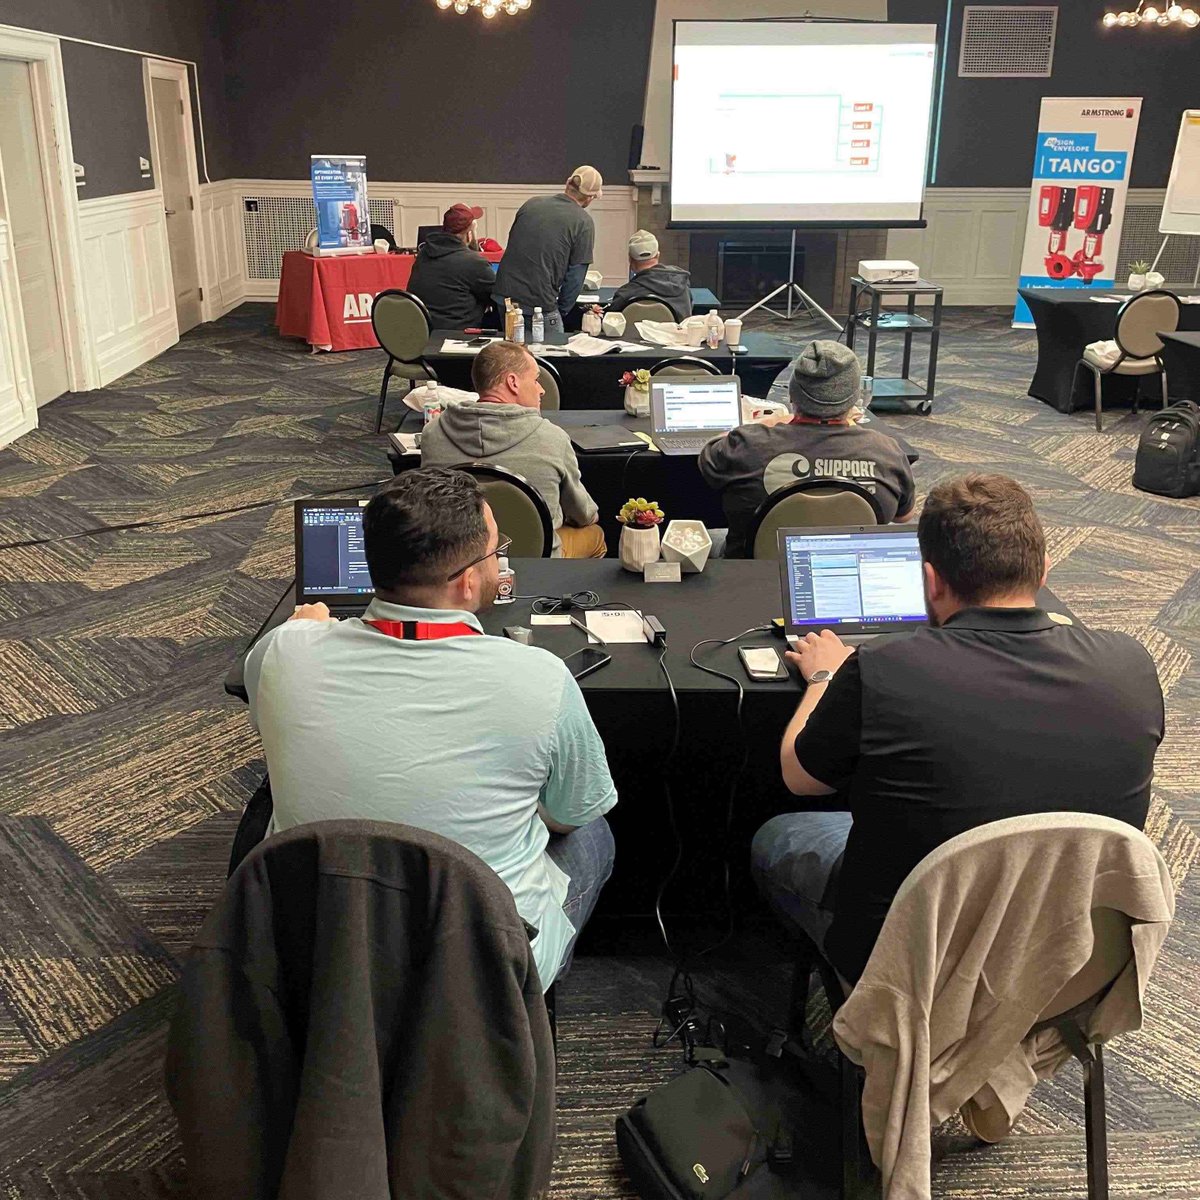 Join us for our upcoming Tier 3 Training session in Toronto, Wednesday, May 15th, and Thursday, May 16th. This two-day session will provide in-depth info on startup, commissioning and servicing for Design Envelope pumps and boosters. Sign up today: bit.ly/3JWdskI